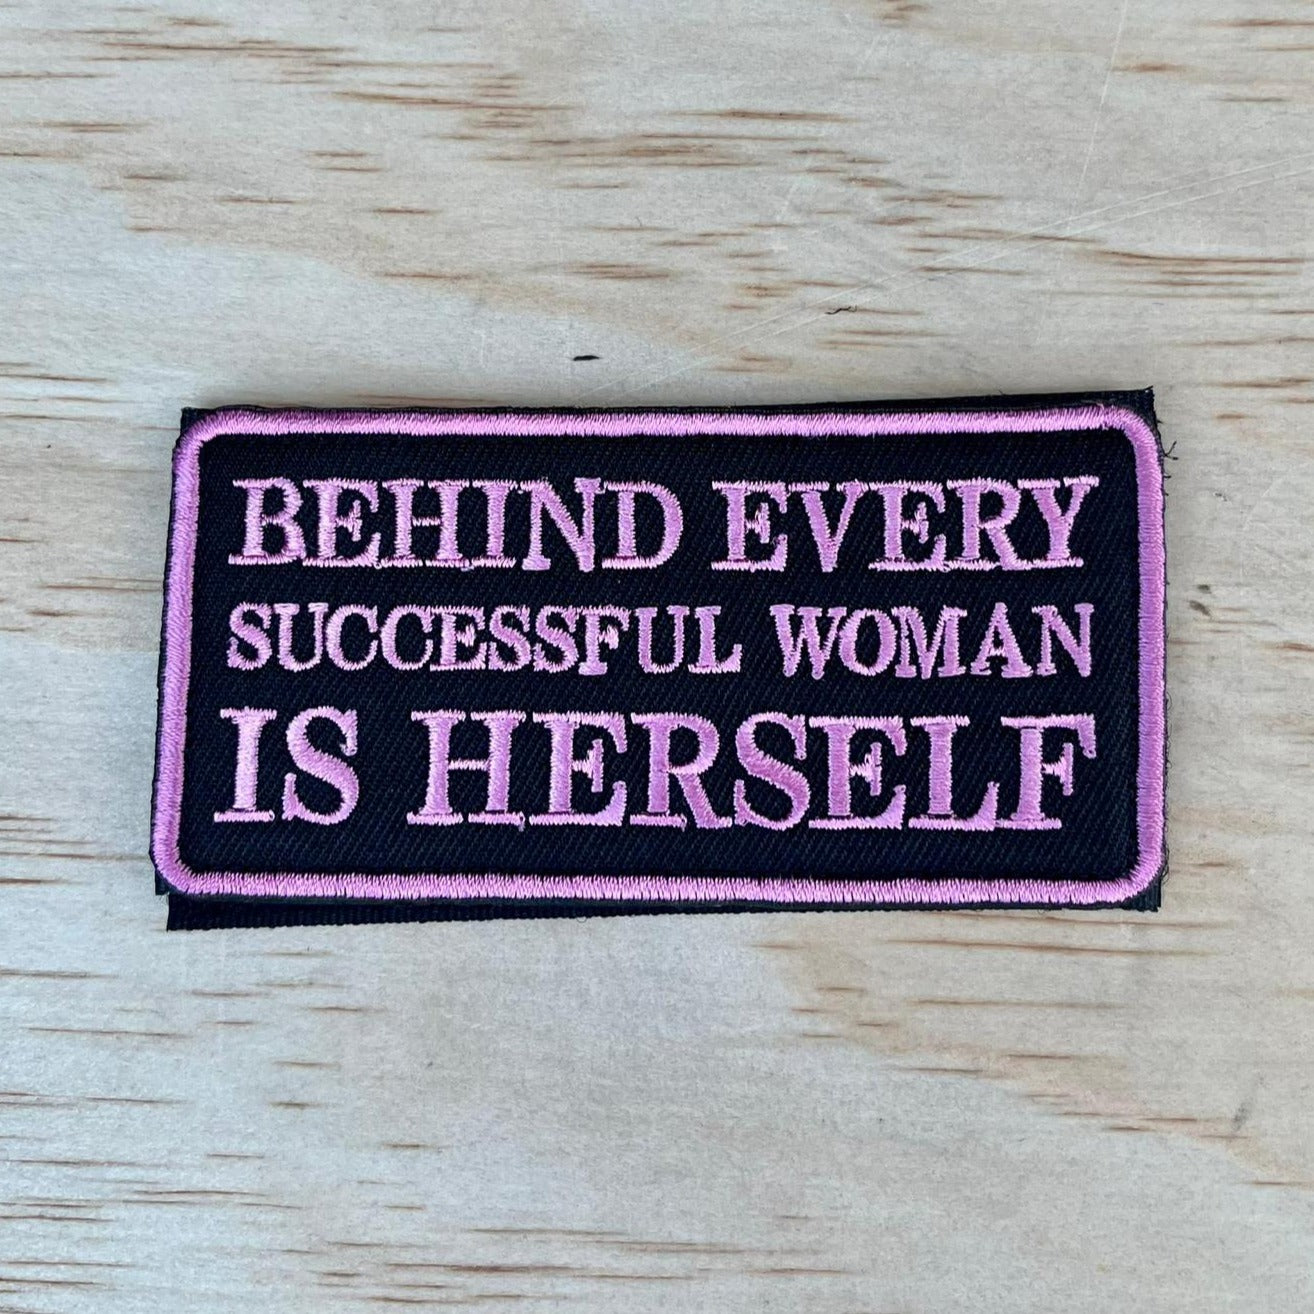 Successful woman patch